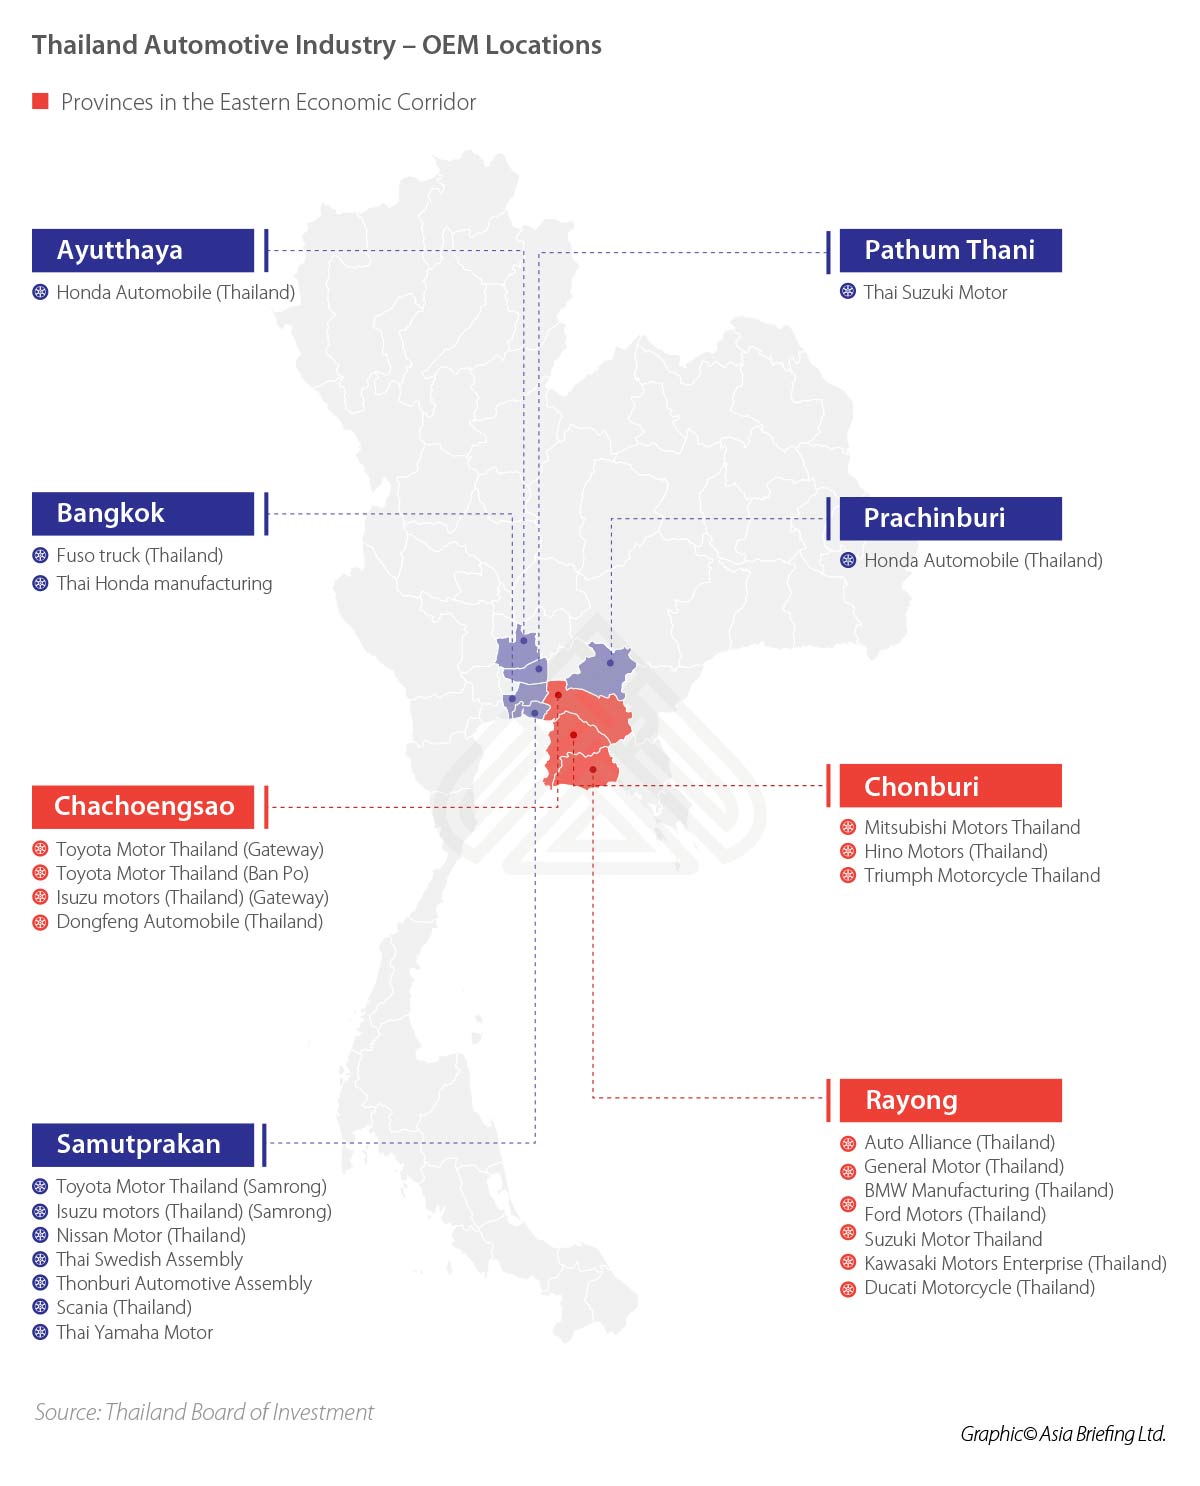 ASB Thailand Automotive Industry OEM Locations